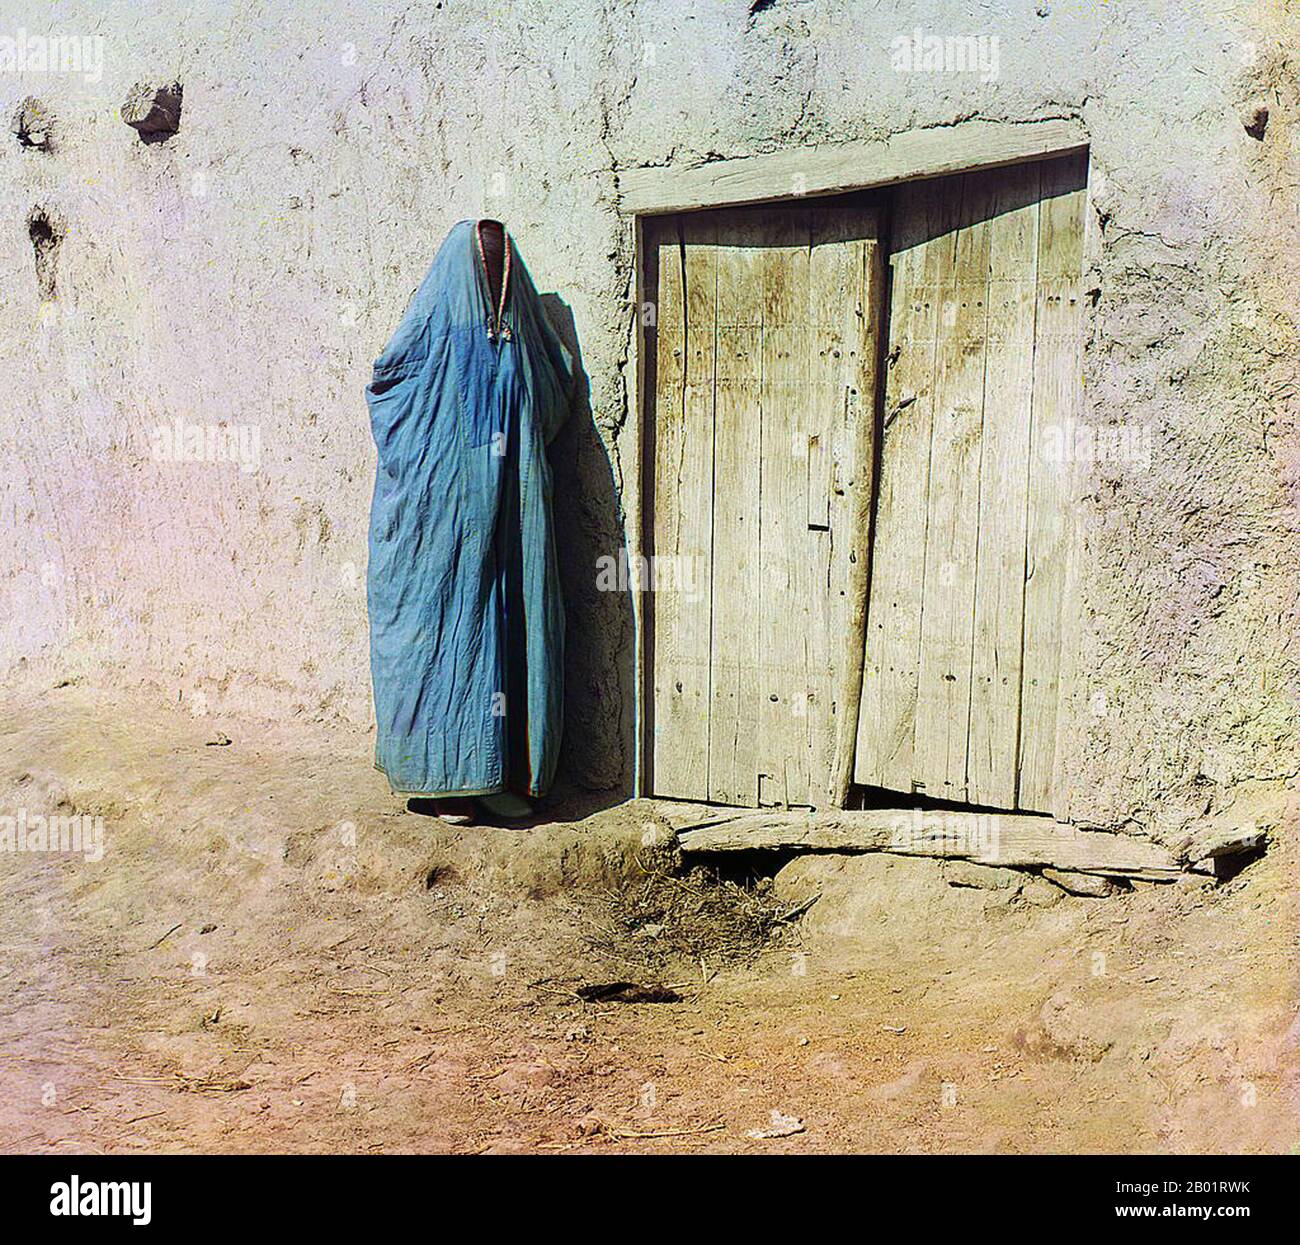 Uzbekistan: 'Sart woman. Samarkand. Woman in purdah, standing near wooden door'. Photo by Sergei Mikhailovich Prokudin-Gorskii (31 August 1863 - 27 September 1944), c. 1905-1915.  A paranja or paranji, known as a 'burqa' in Arabic, is a traditional Central Asian robe for women and that completely envelops them from head to toe. In the 1800s, women of the Tajiks and Uzbek Muslims were required to wear paranja when outside their home. They were banned during the Soviet Union, though some Uzbeks violently opposed the anti-paranja. These days, most Central Asian women do not wear the paranja. Stock Photo